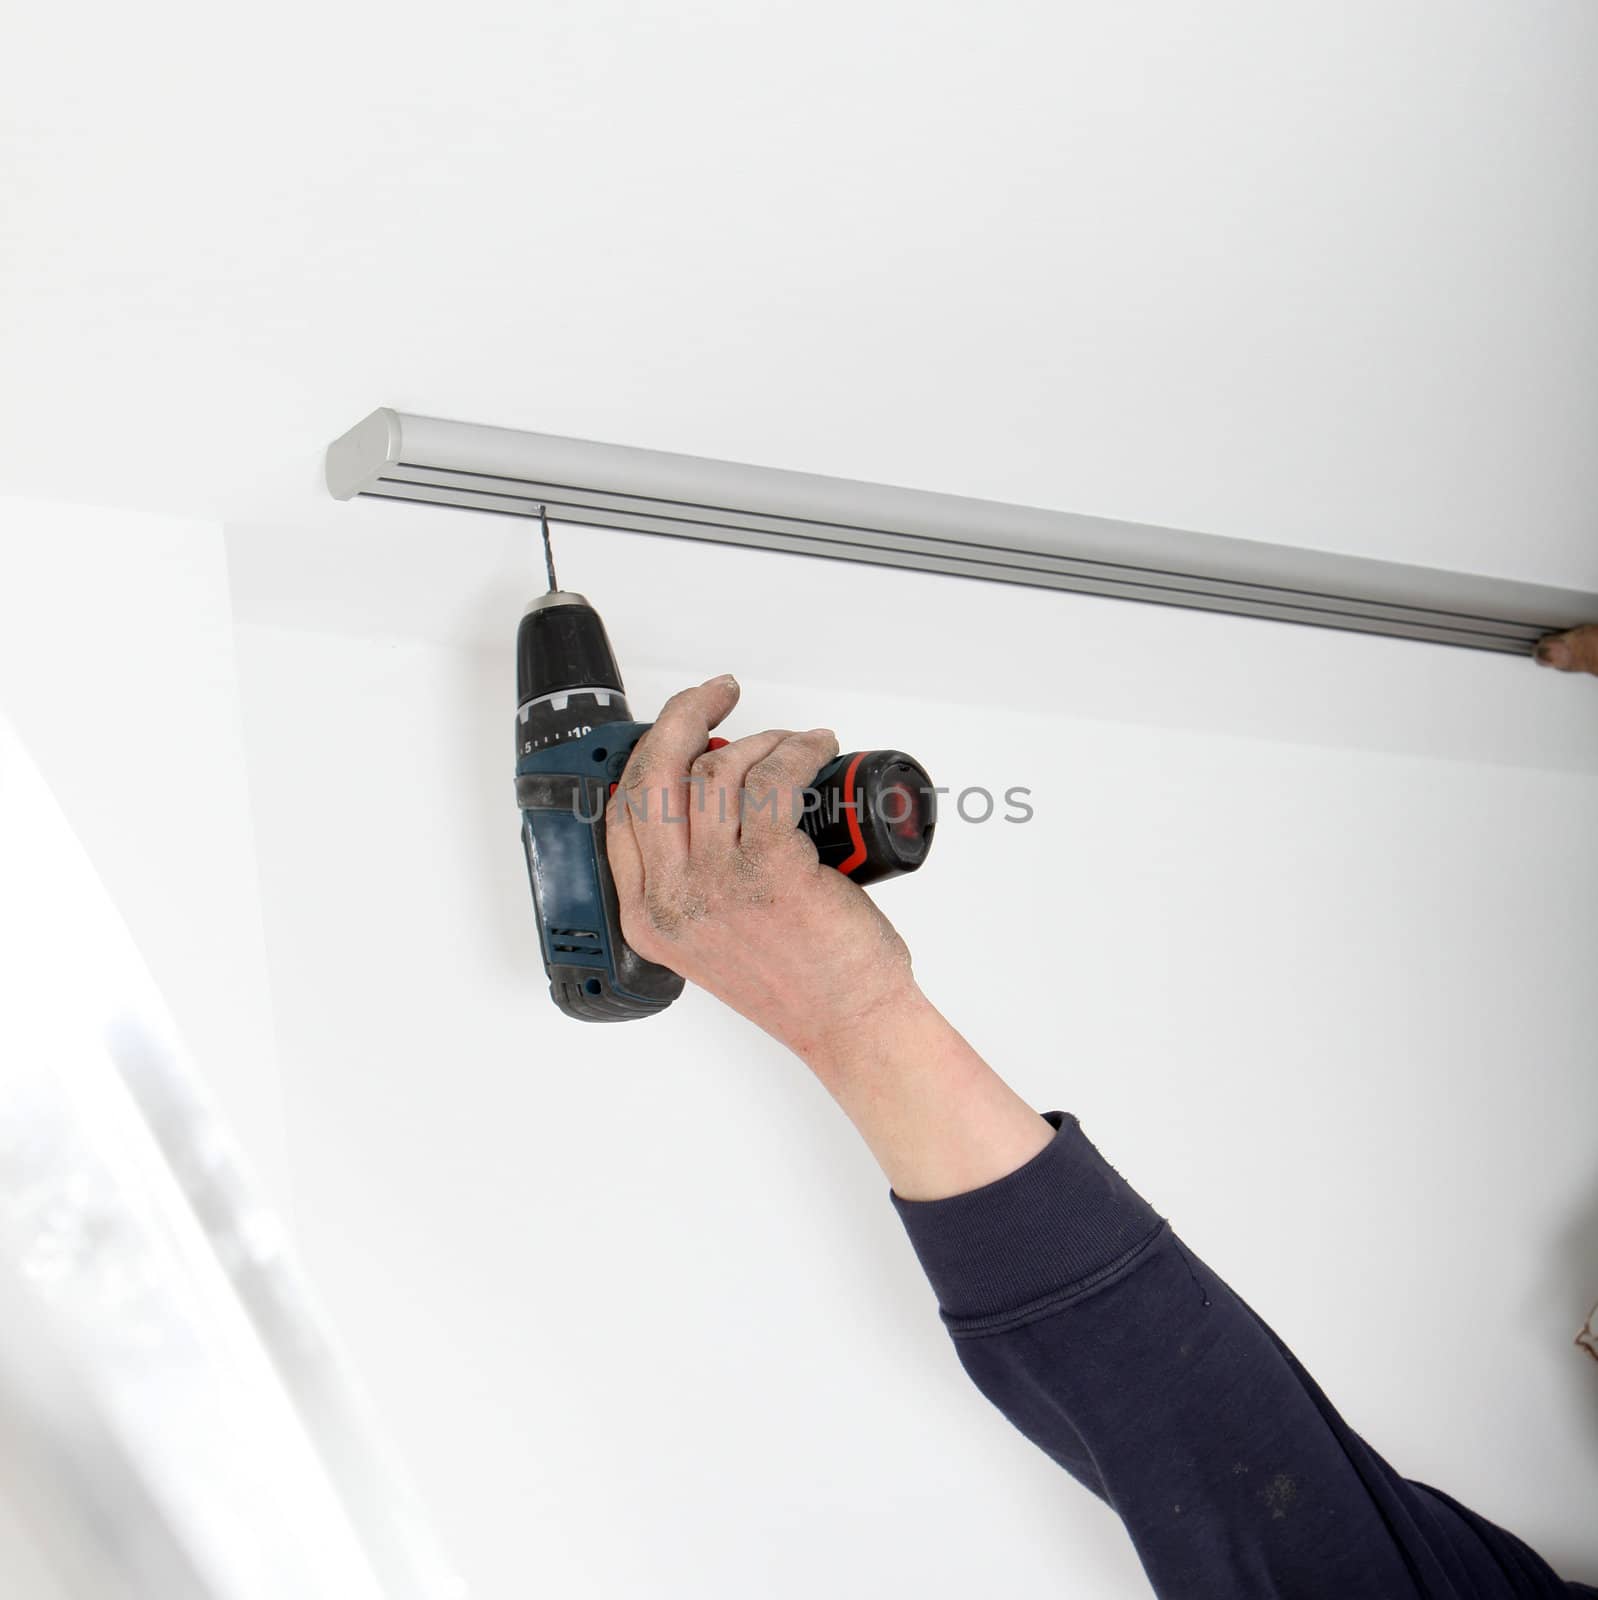 The arm of an artisan using a portable cordless drill to fit a length of aluminium curtain track to the ceiling